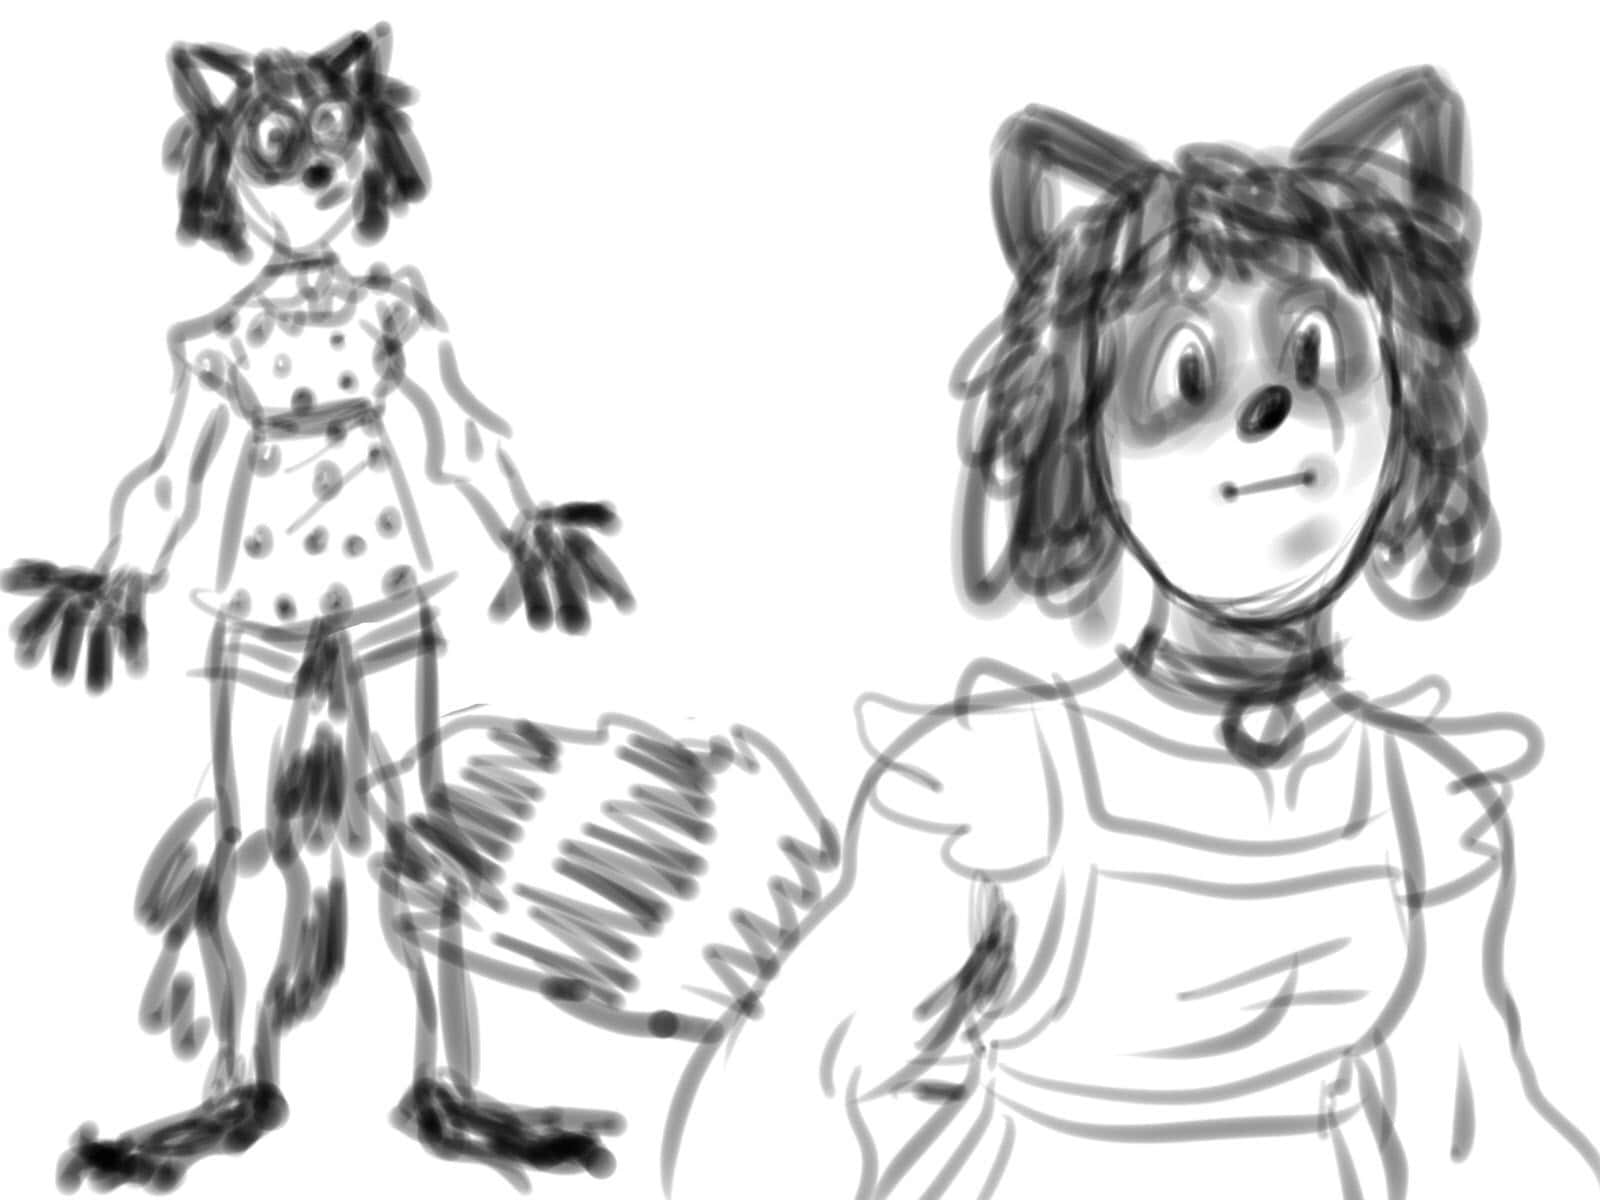 a scraggly picture of a raccoon creature and a georgie bust up portrait. she looks like a furry or an anthropomorphic character from the tv show arthur.